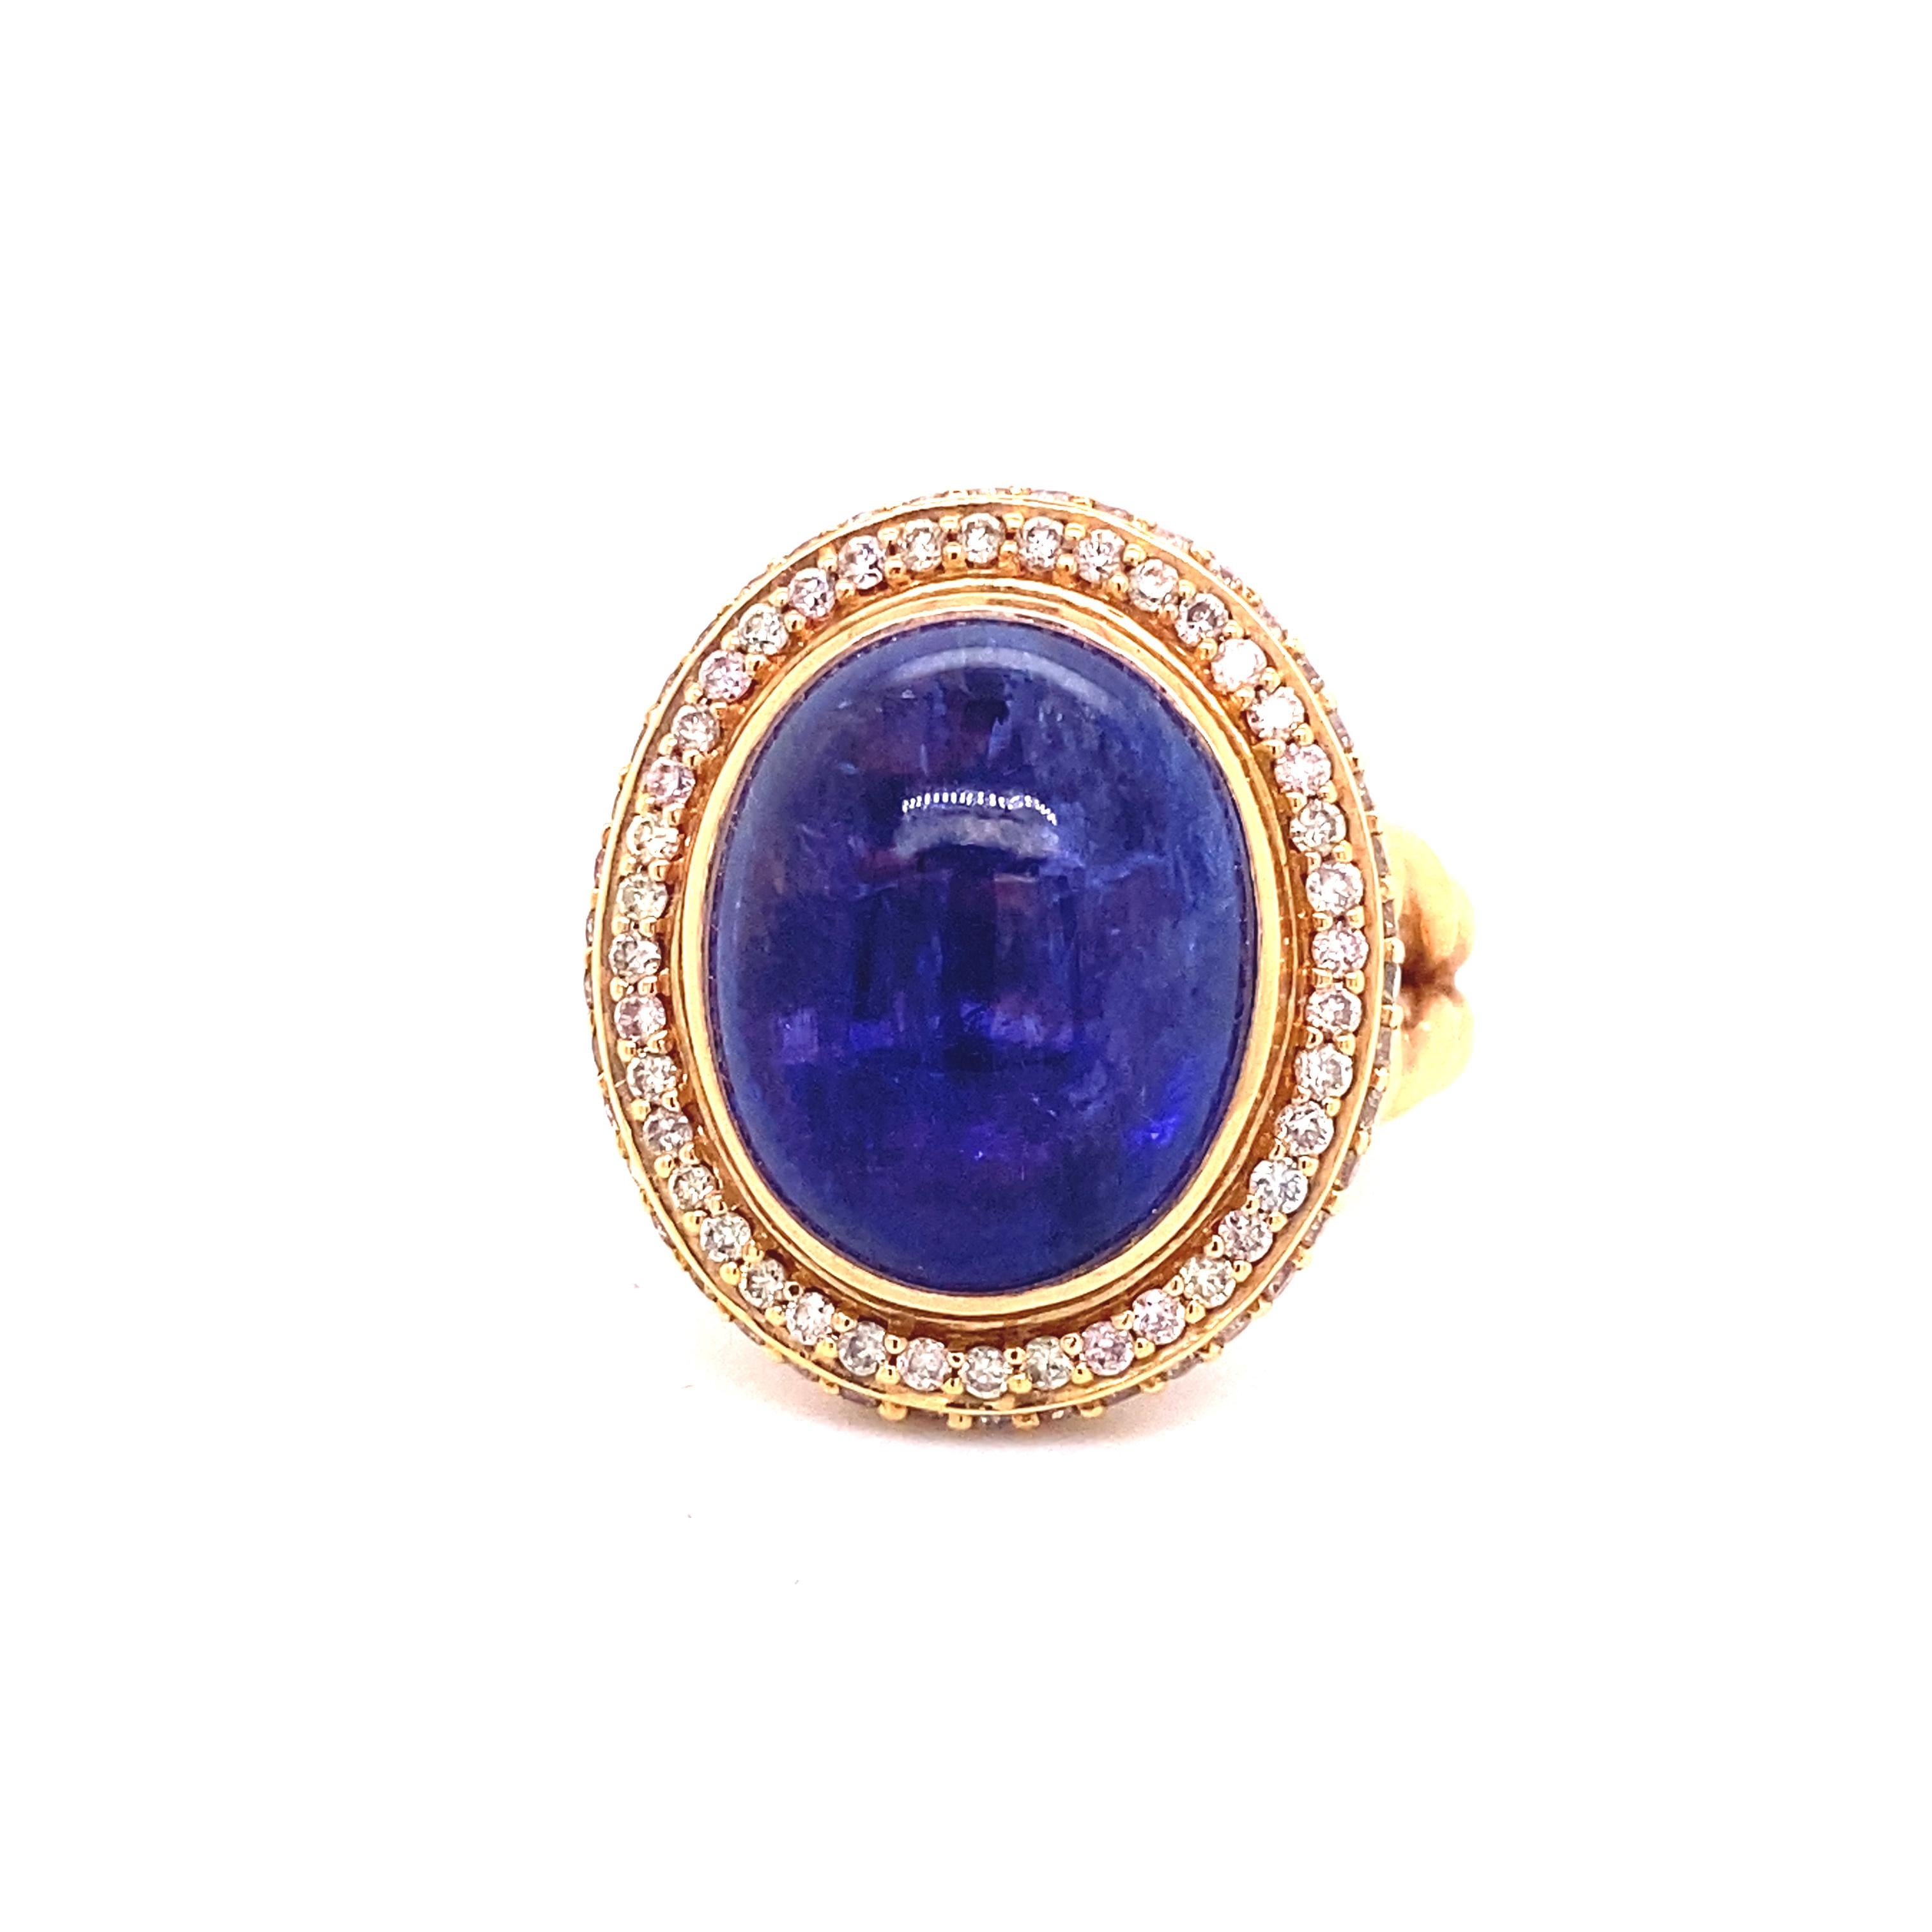 Large Tanzanite Cabochon Ring in 18 Karat Rose Gold and Diamonds

This magnificent cocktail ring showcases a beautiful 16.7 carat Tanzanite cabochon richly vivid in violet-bluish hues. Tanzanite is relatively new to the colored stone galaxy. The